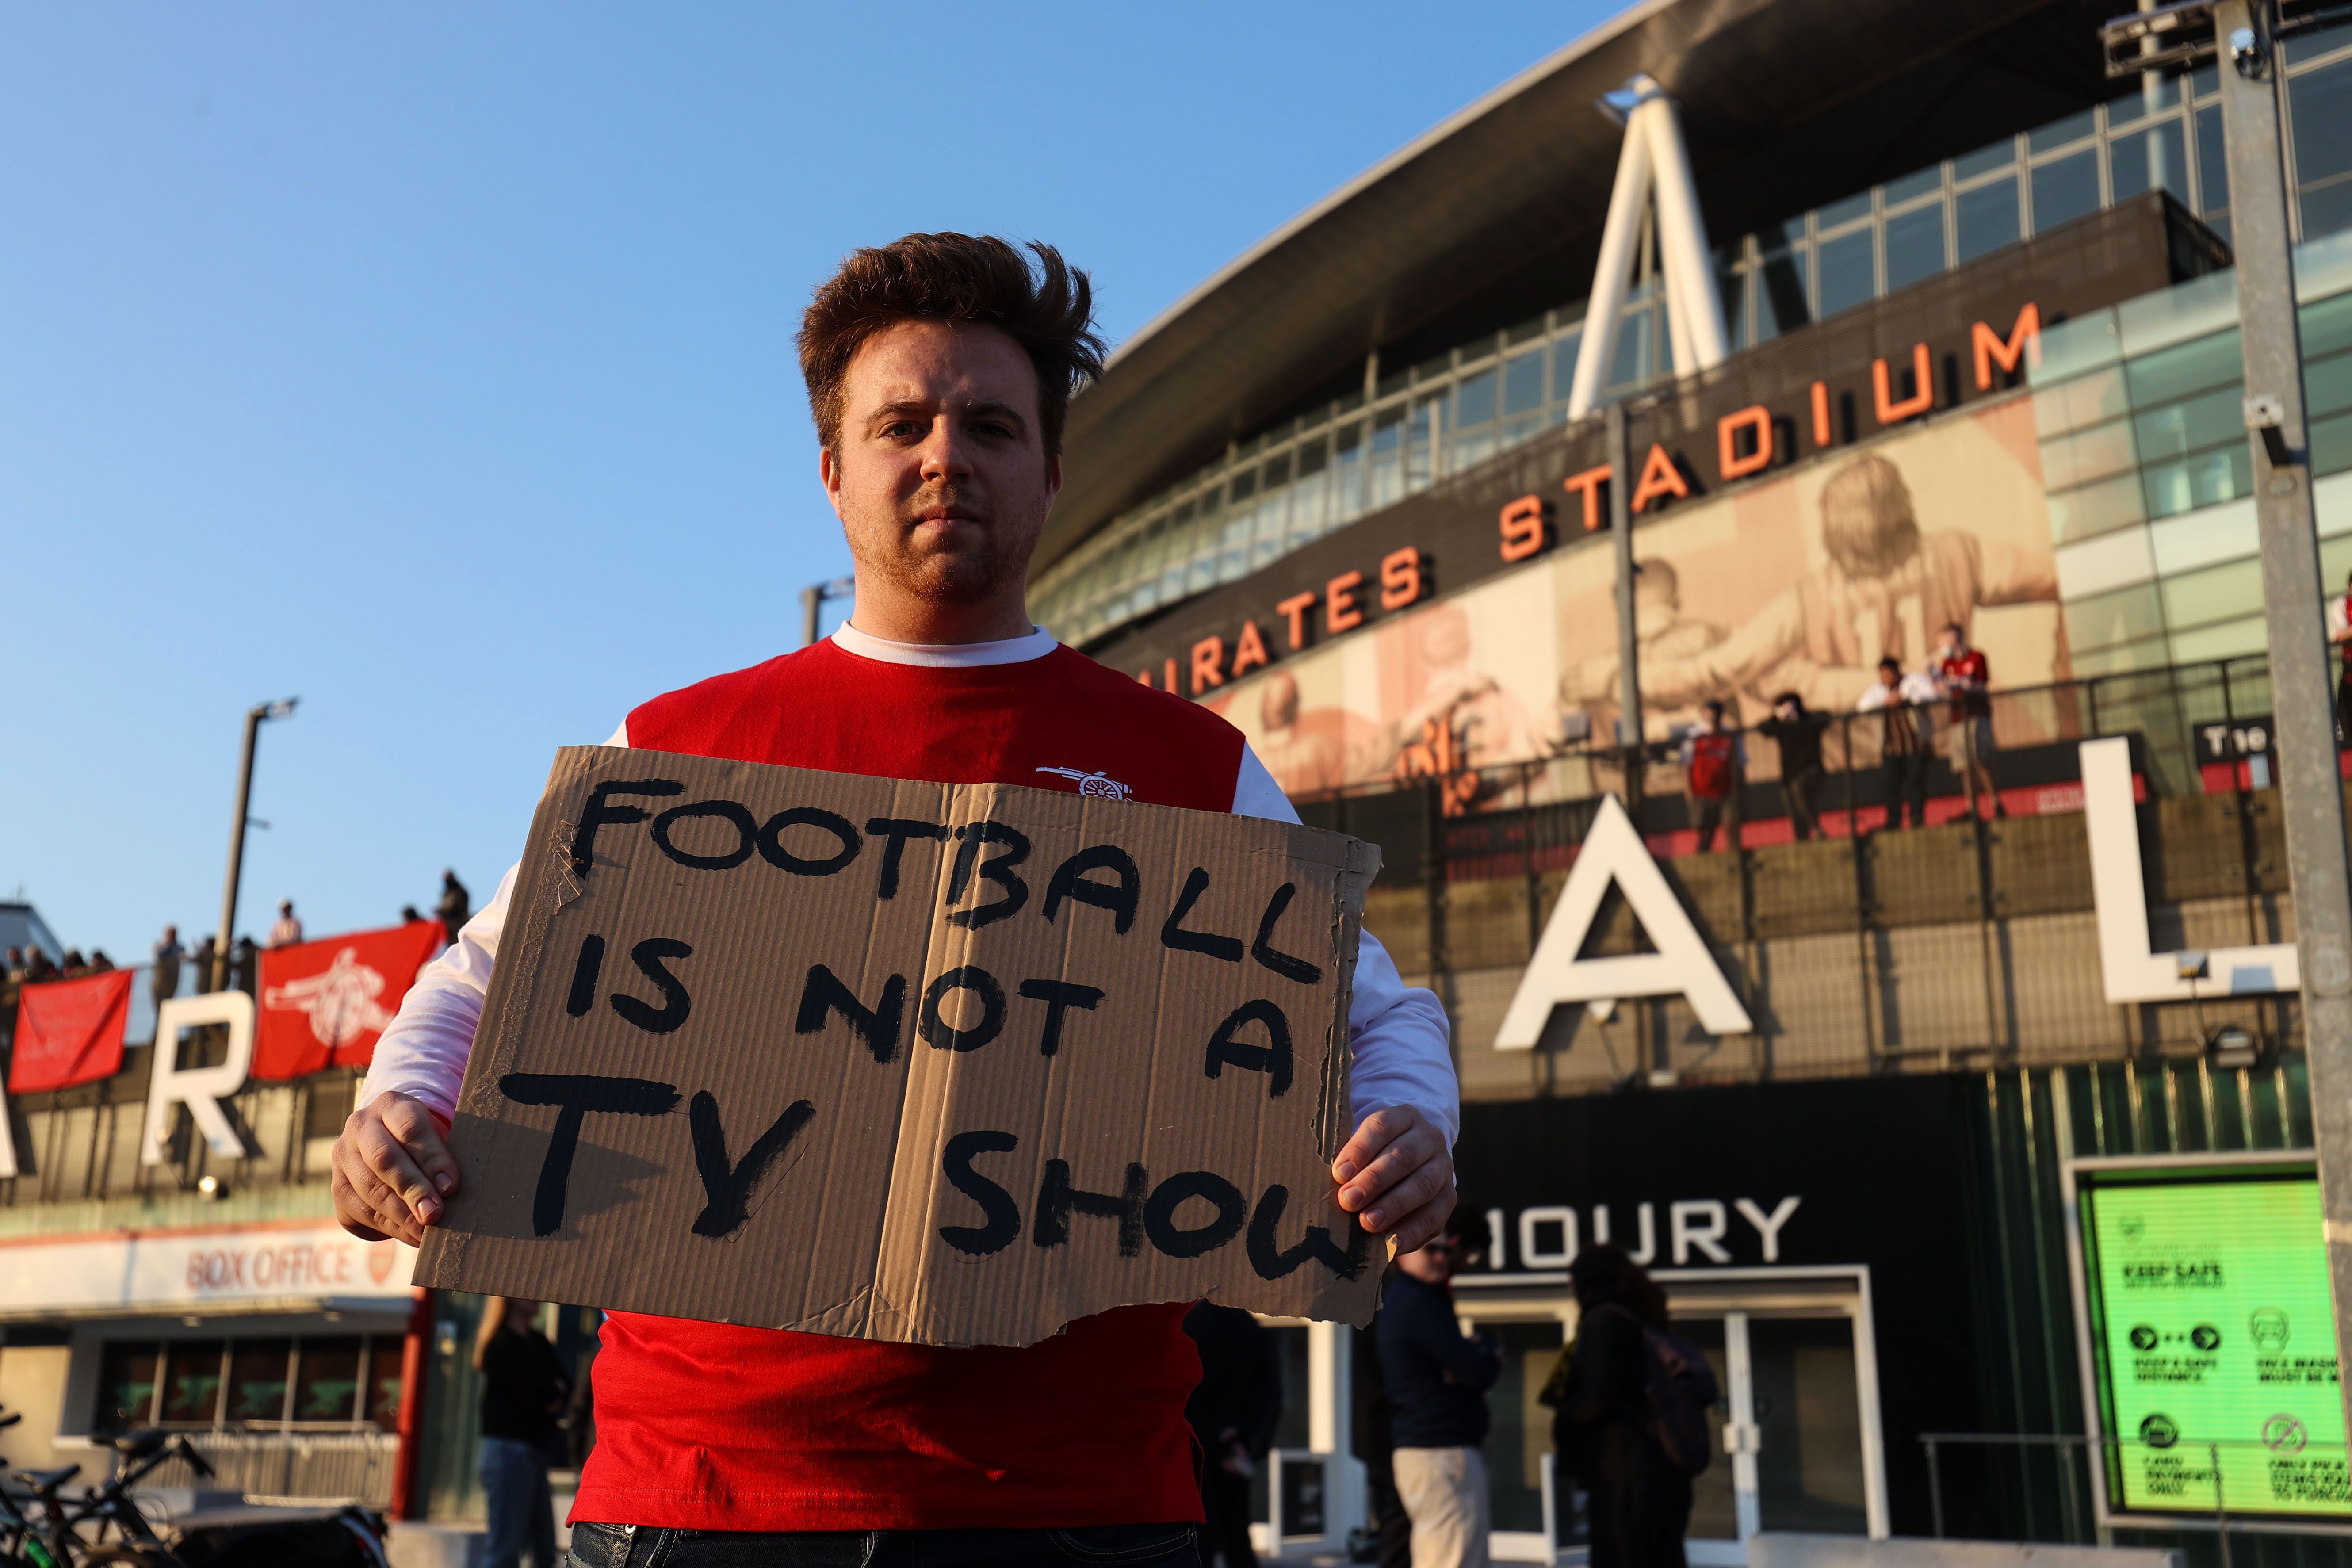 Picture of a man holding a sign that says "Football is not a TV show"